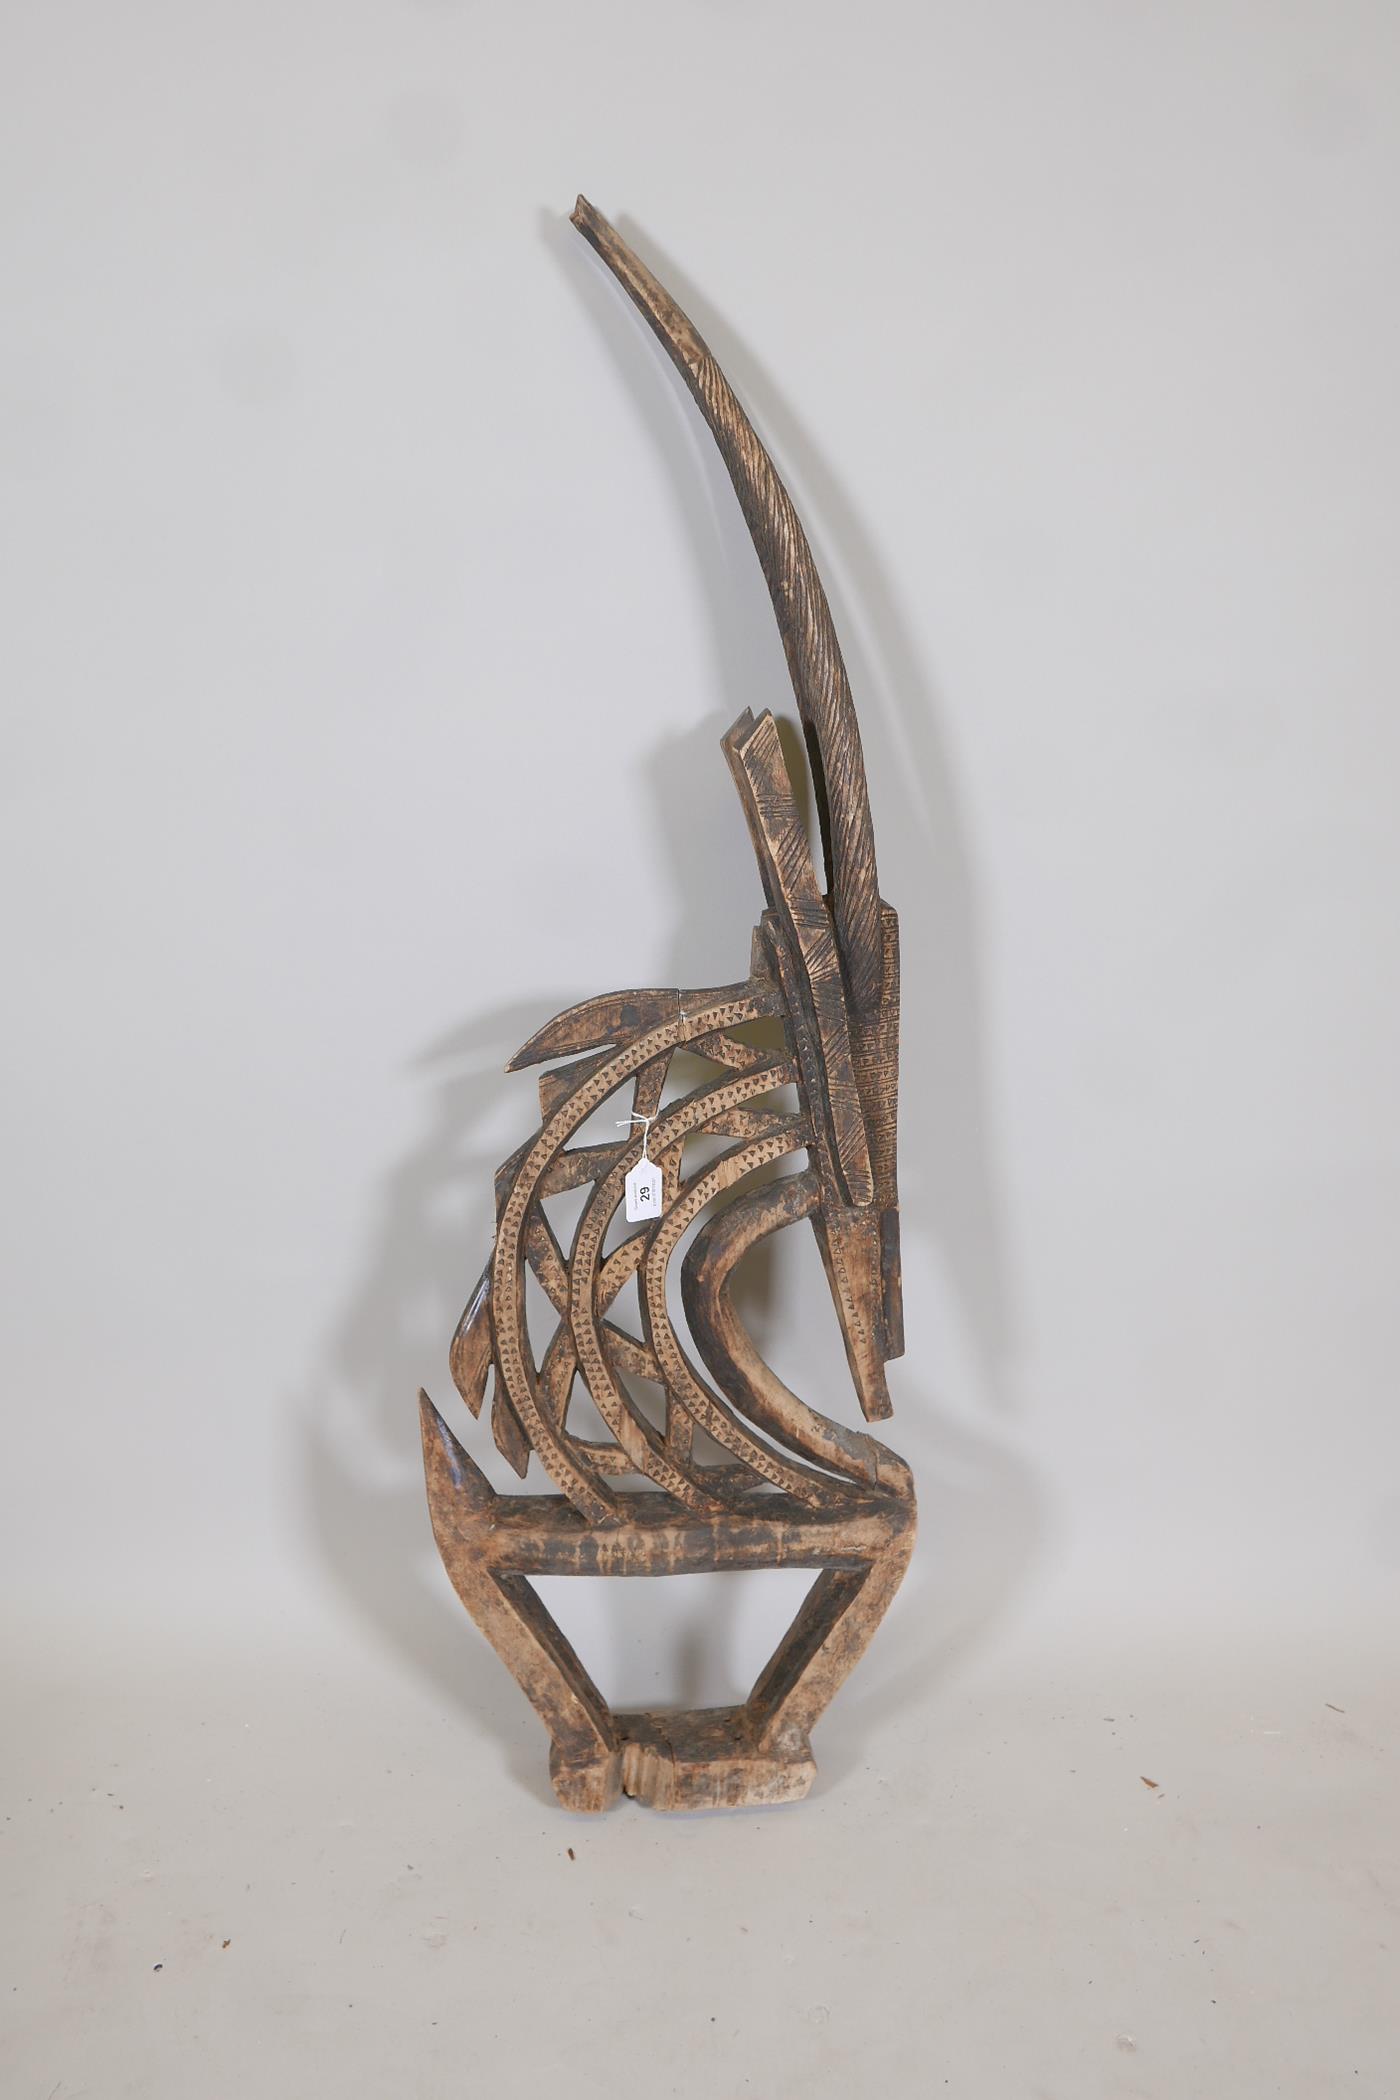 An African carved wood stylised figure of a antelope, A/F, 44" high